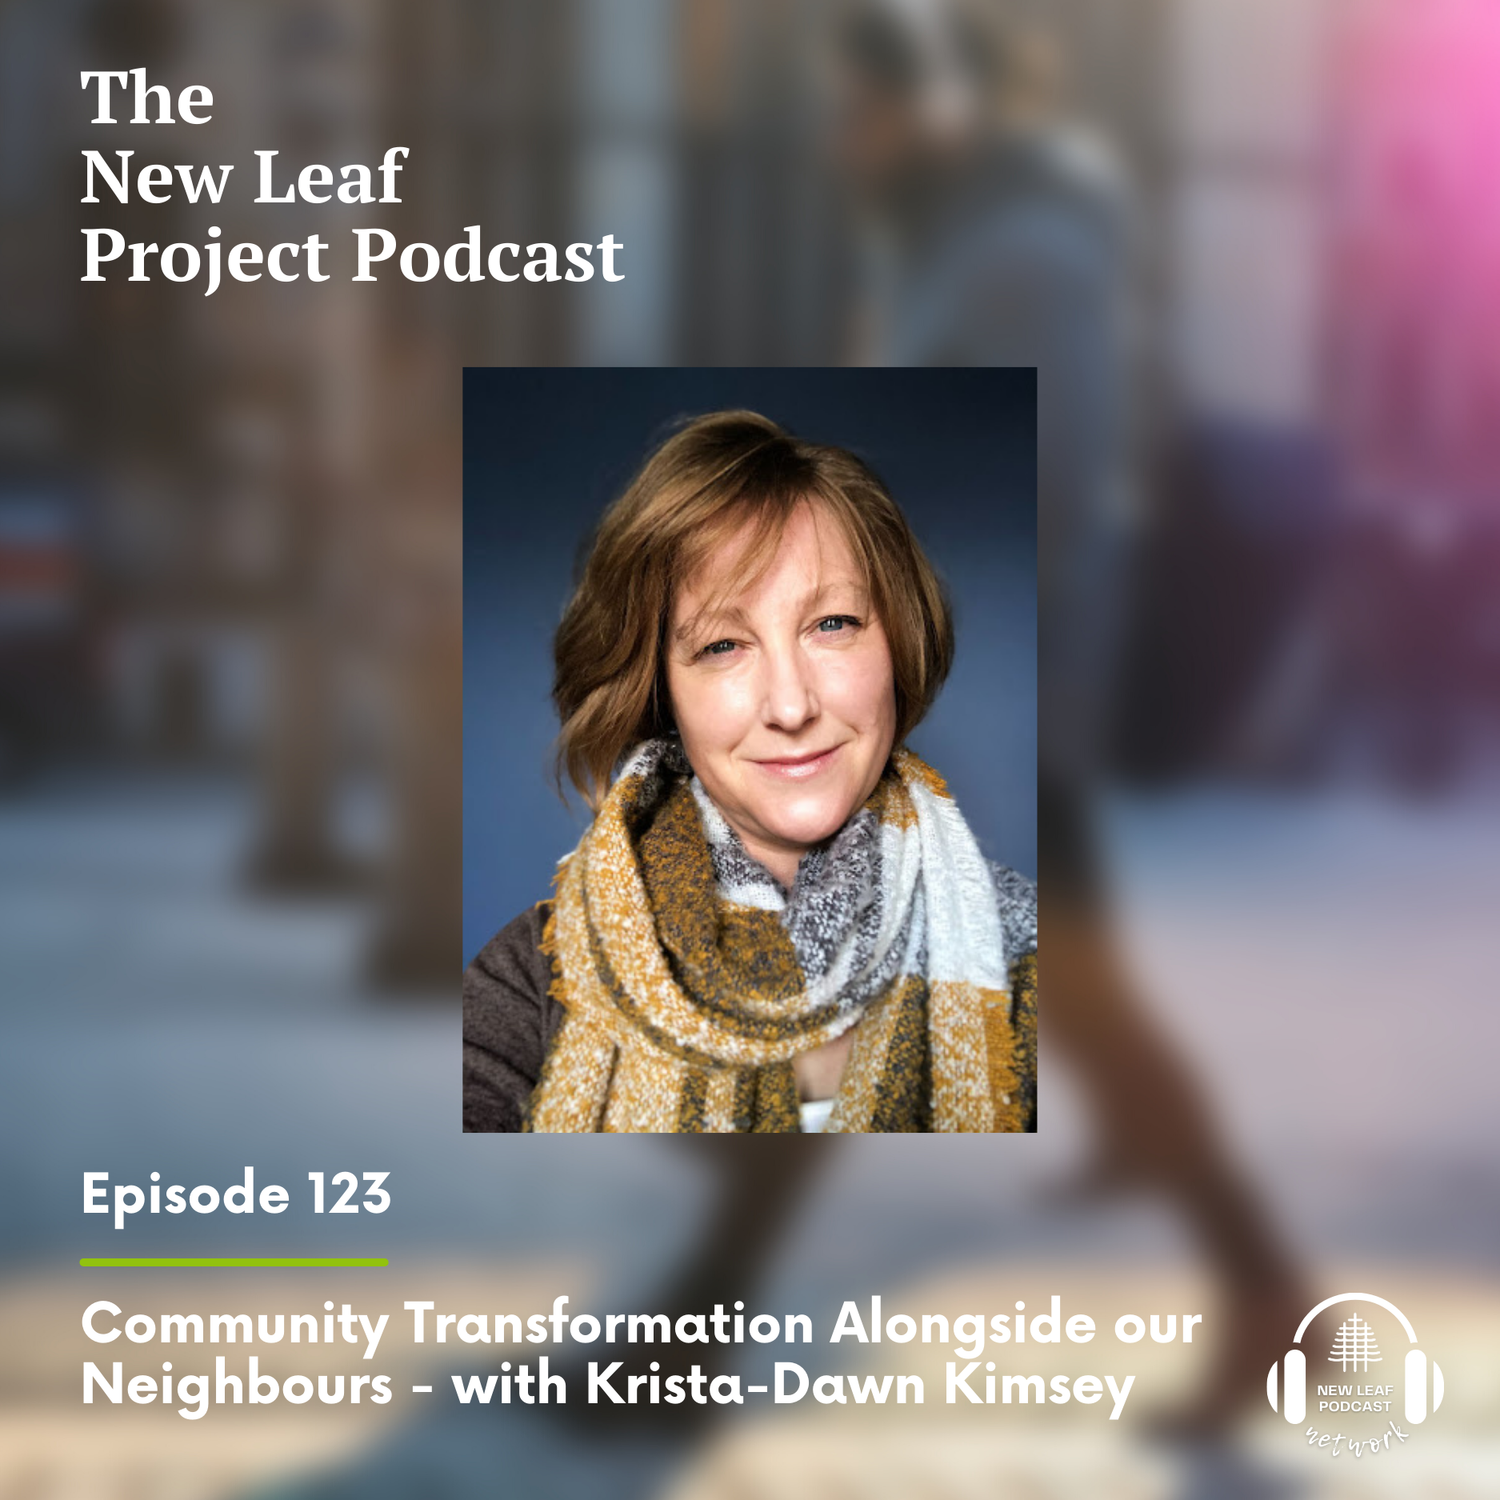 Ep 123 - Community Transformation Alongside our Neighbours - with Krista-Dawn Kimsey